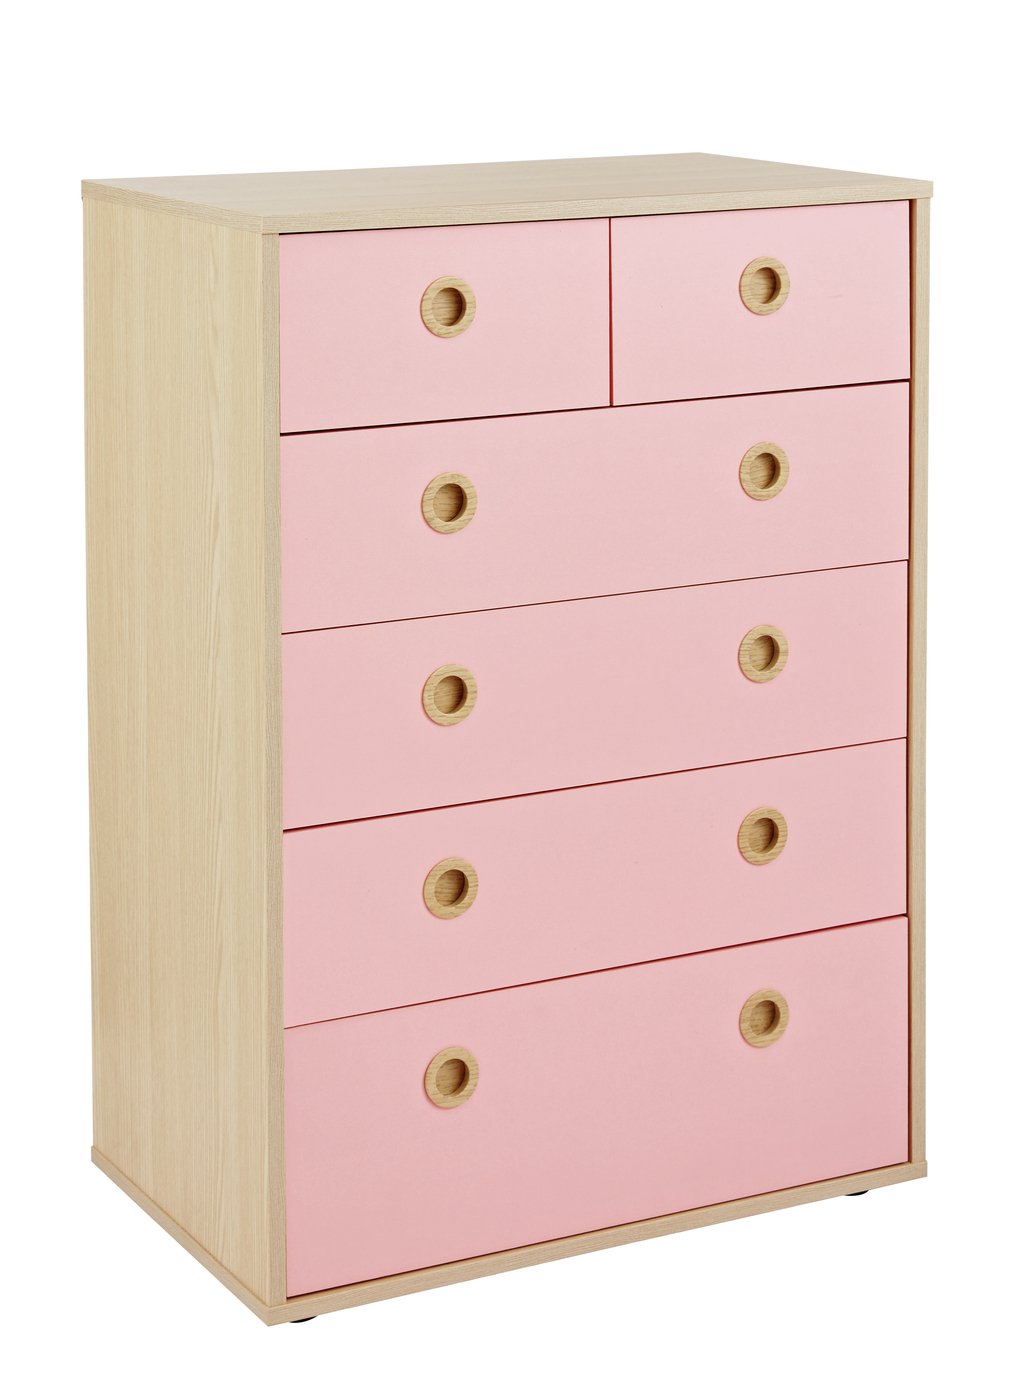 chest of drawers for kids